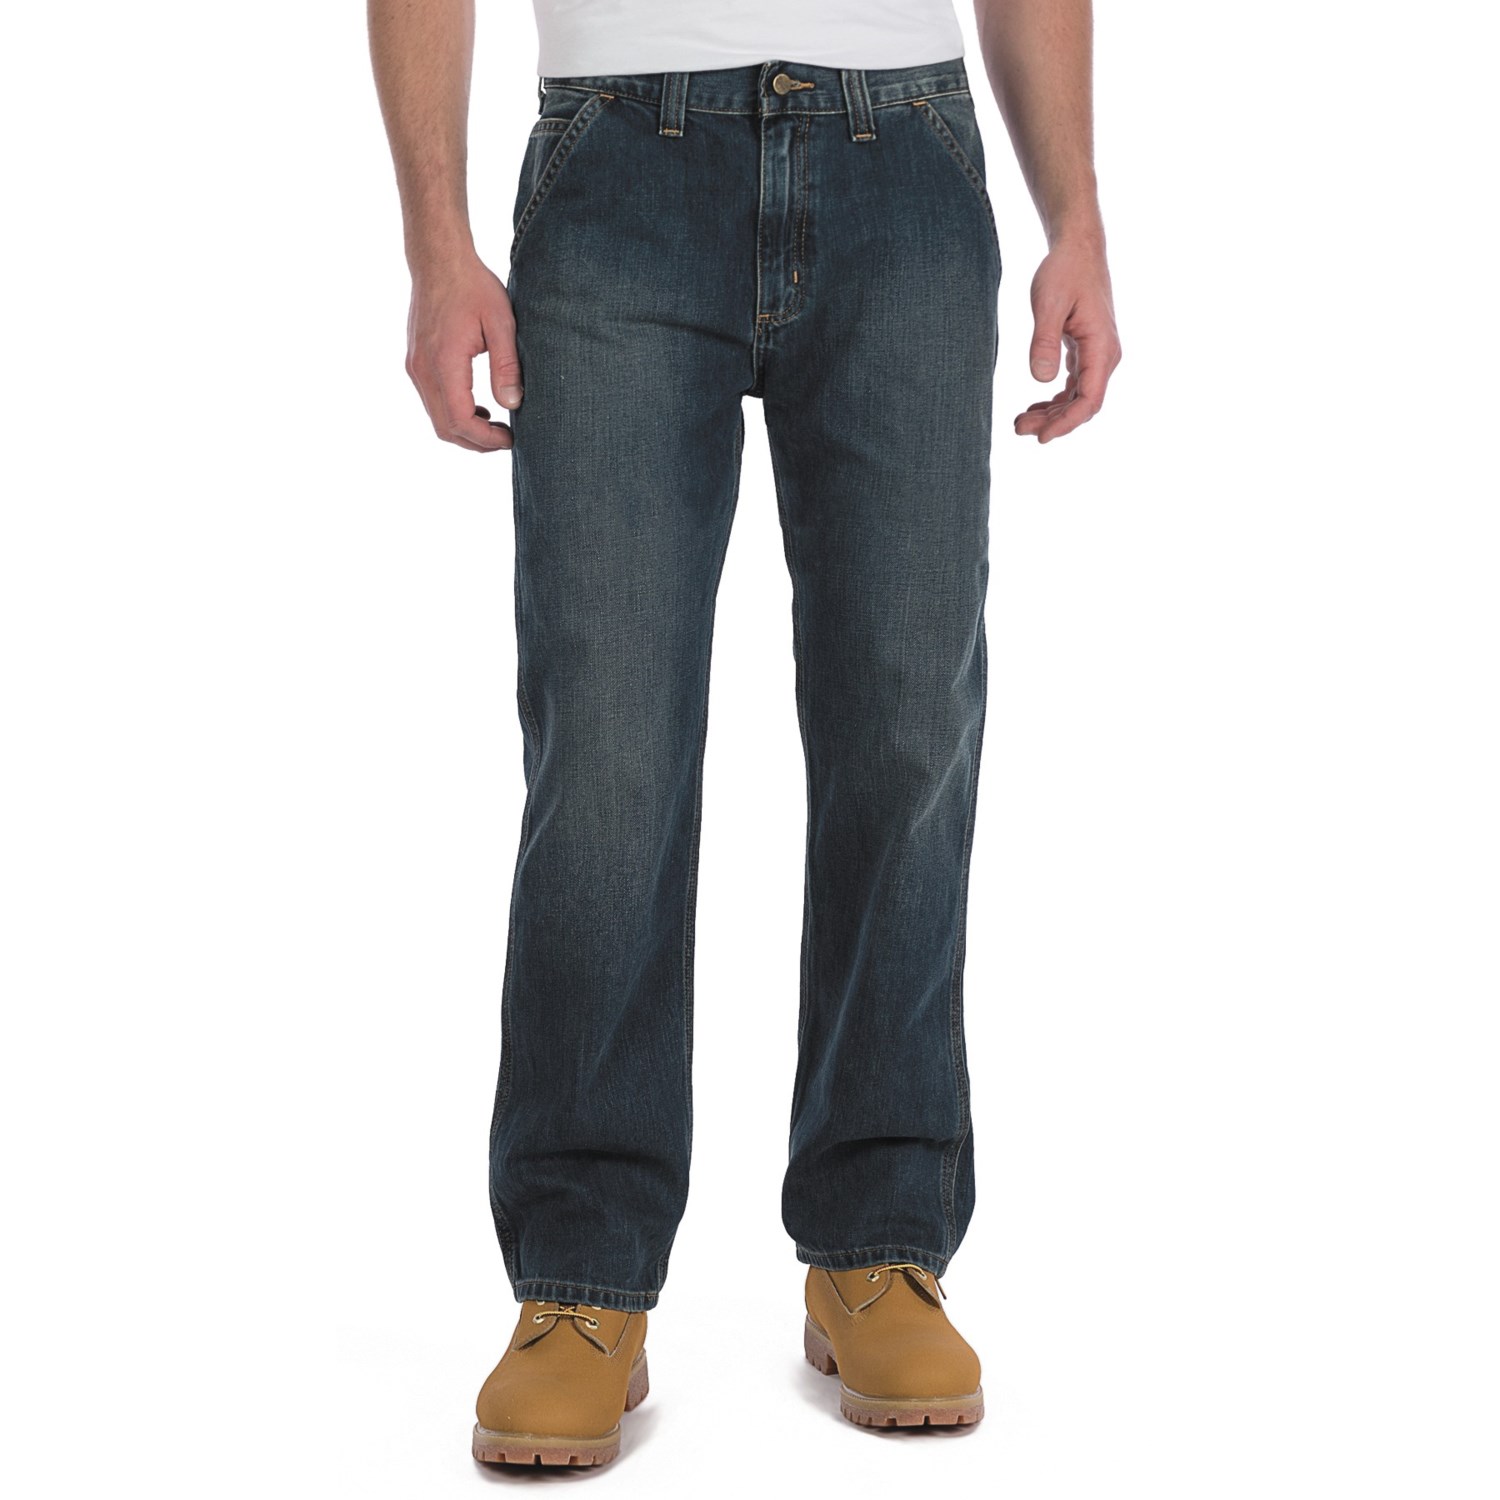 Carhartt Relaxed Fit Jeans (For Men) 5123W